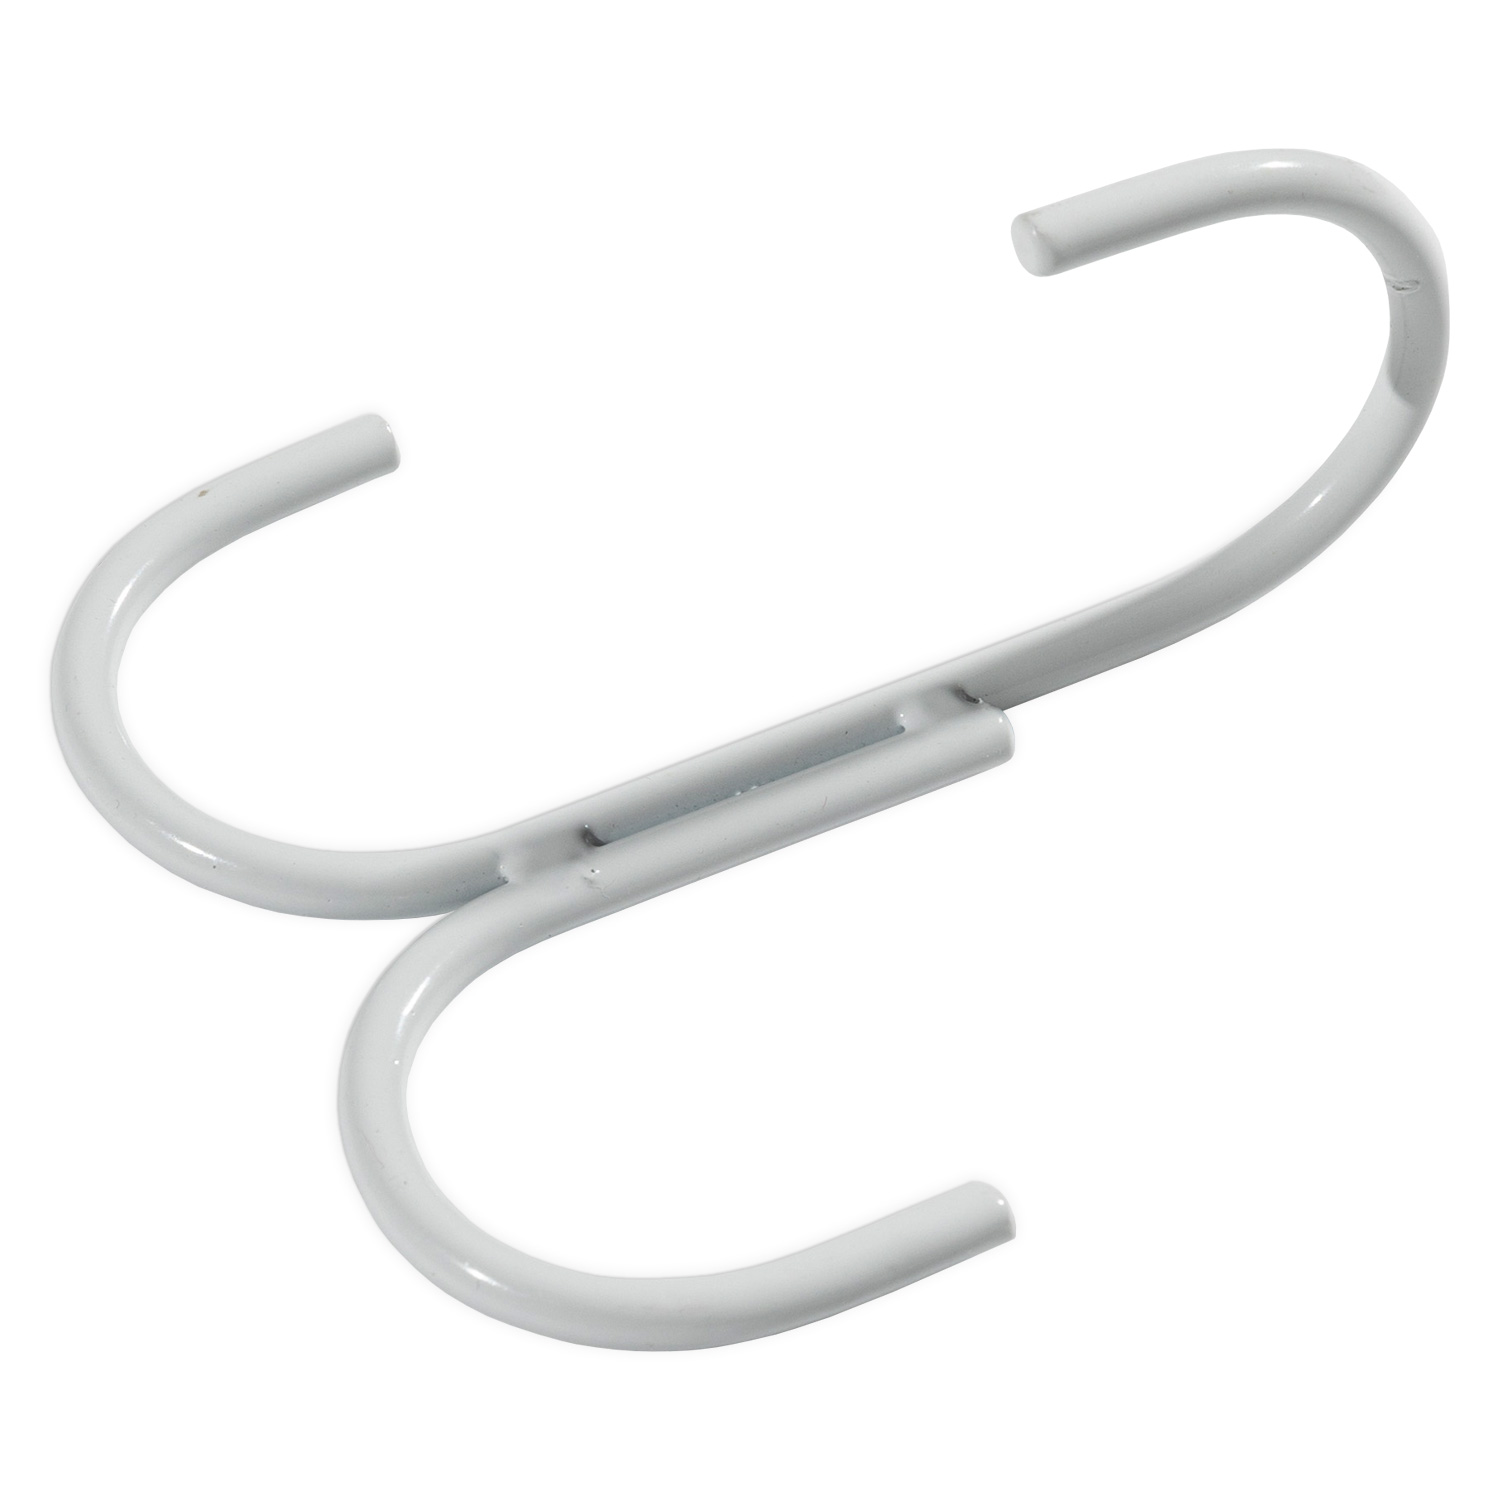 Communication Cable Hook